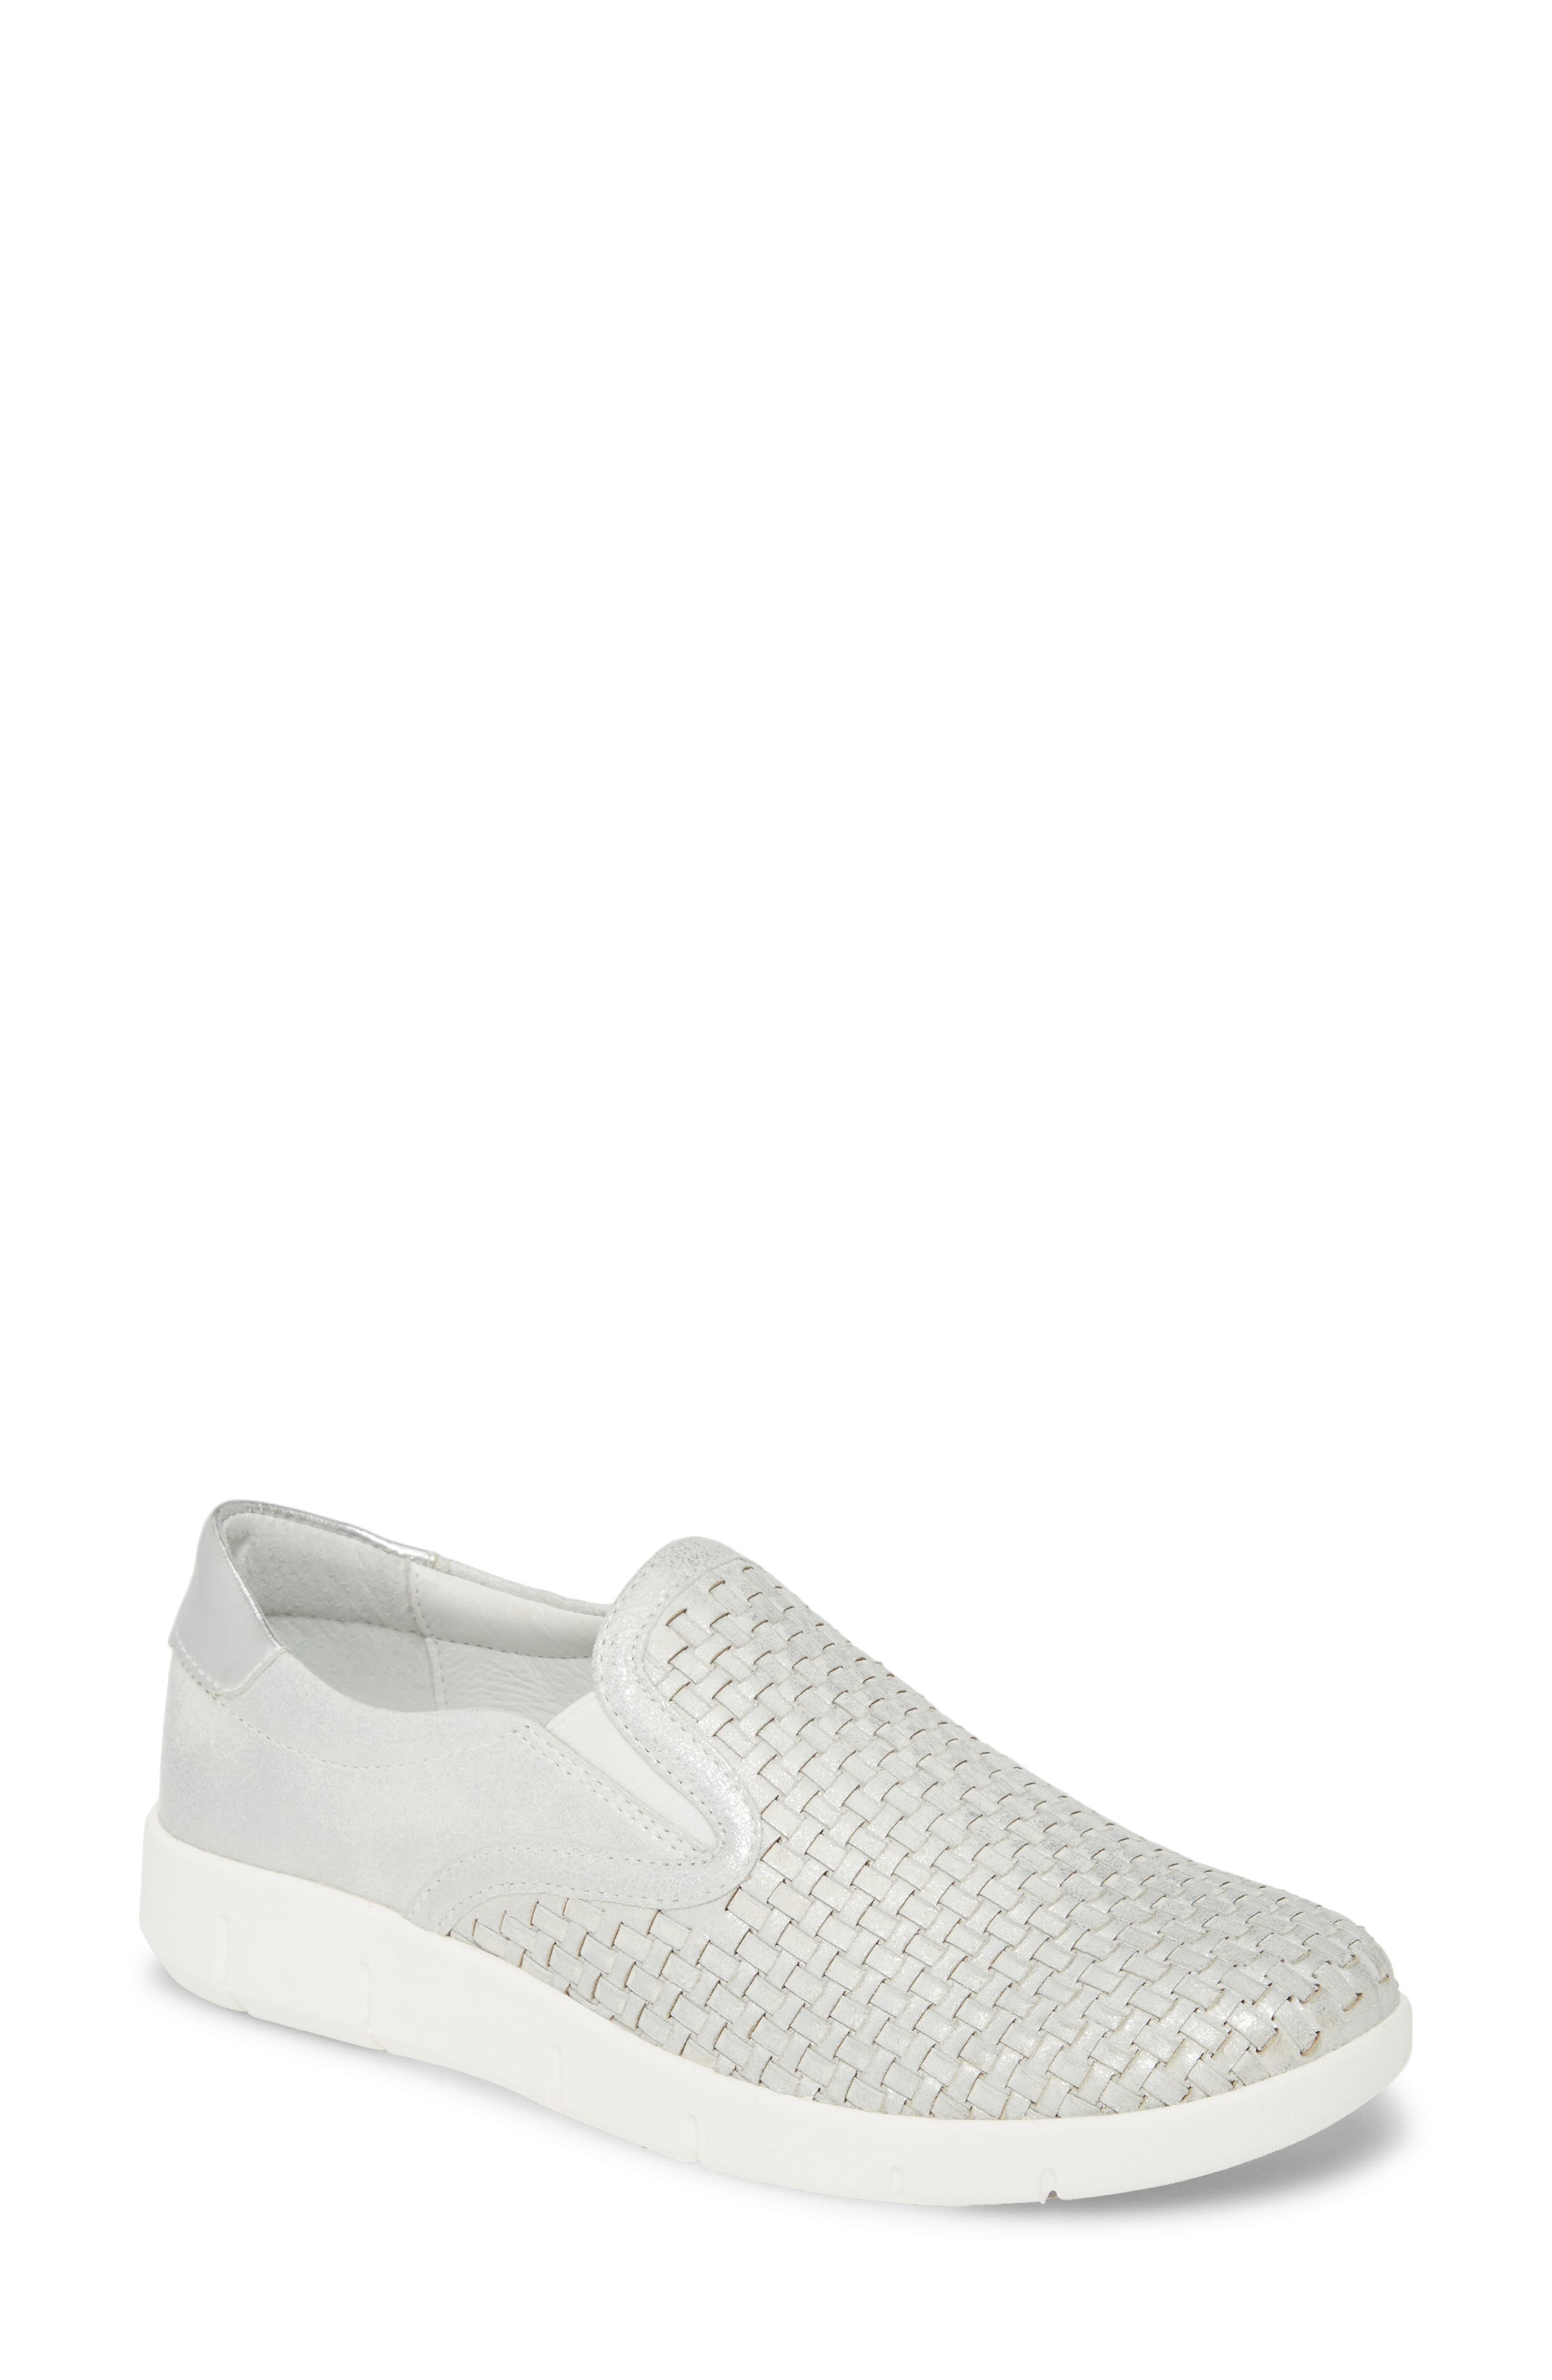 johnston and murphy slip on sneakers